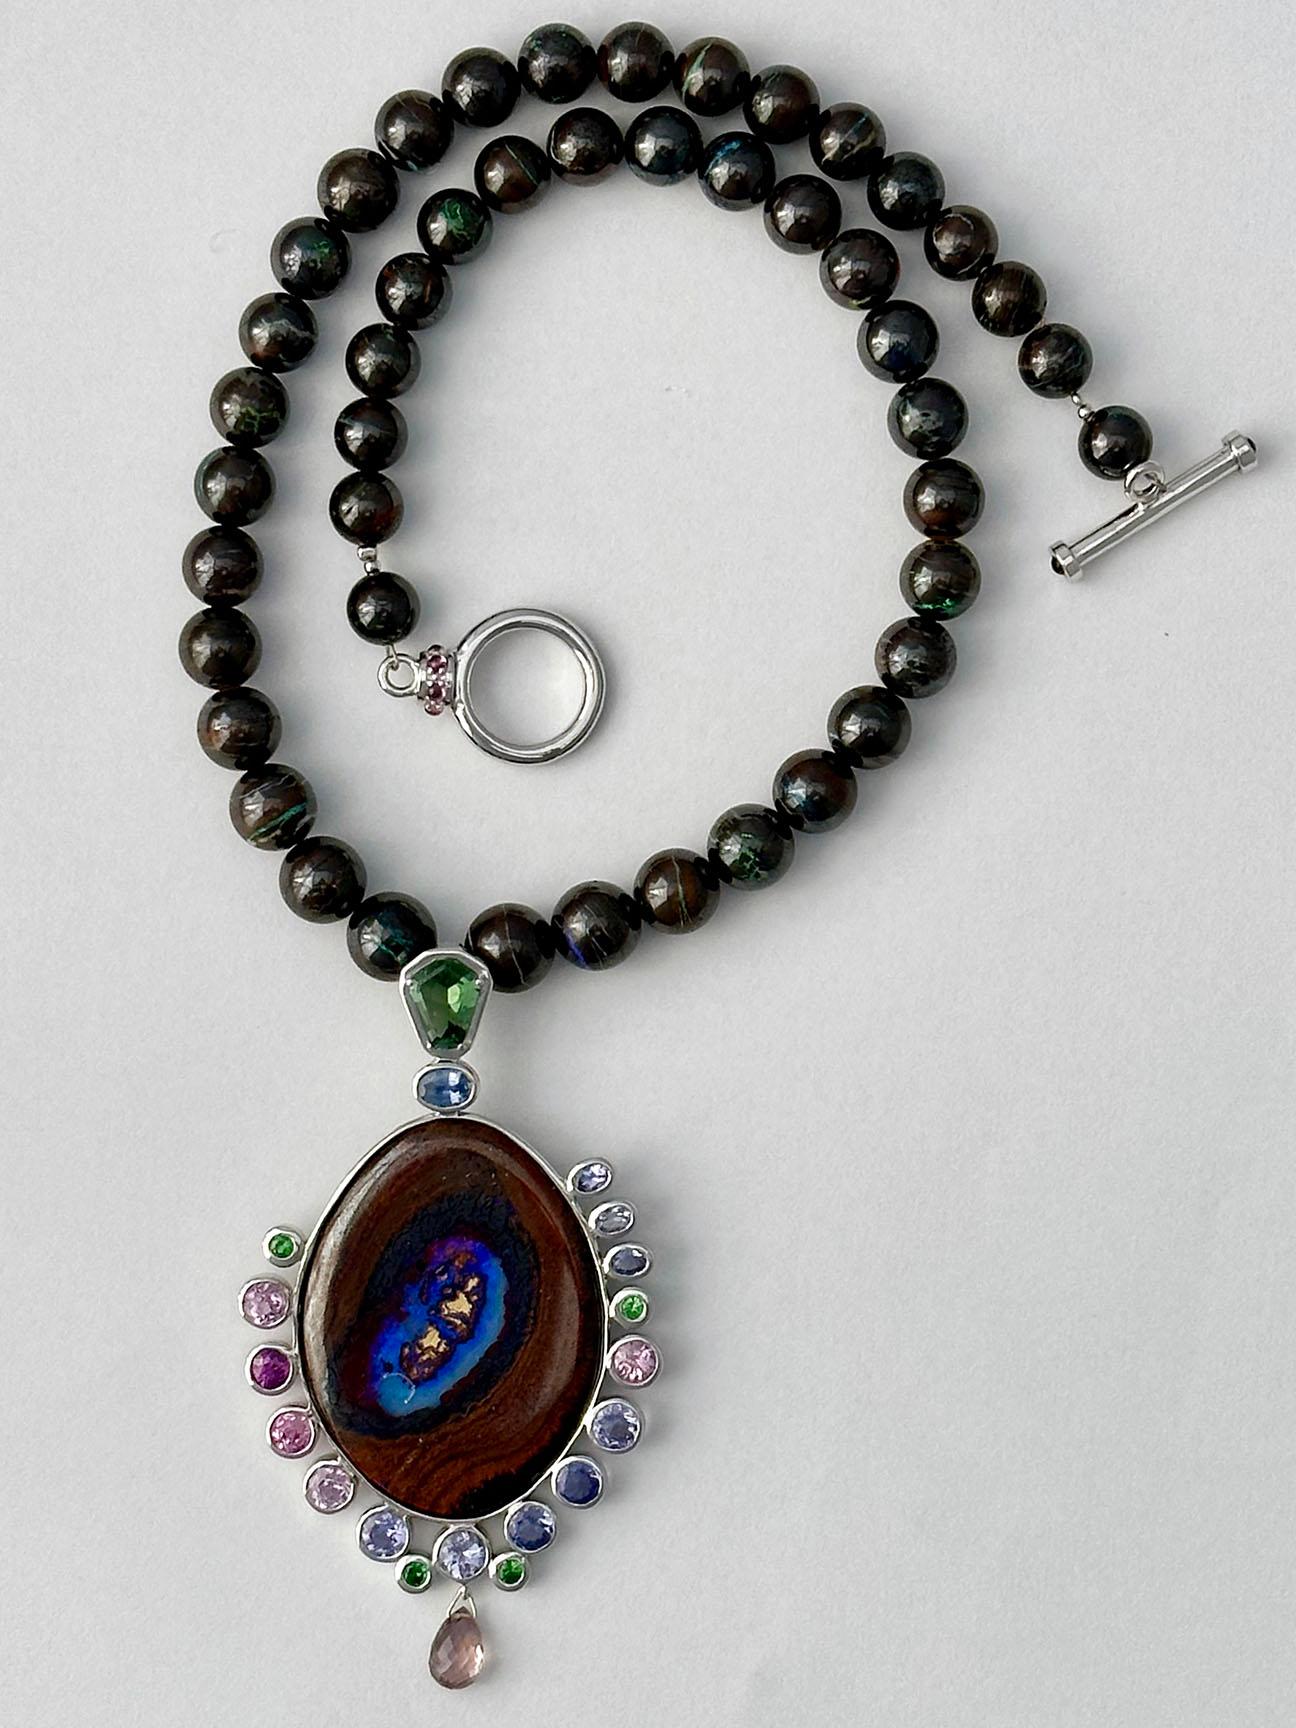 This Majestic one of a kind piece is a masterpiece of color harmony and appeal. A beaded Australian Boulder Opal necklace that features a large central Australian Boulder Opal pendant that is surrounded by Tourmaline, Tanzanites, Tsavorite Garnets